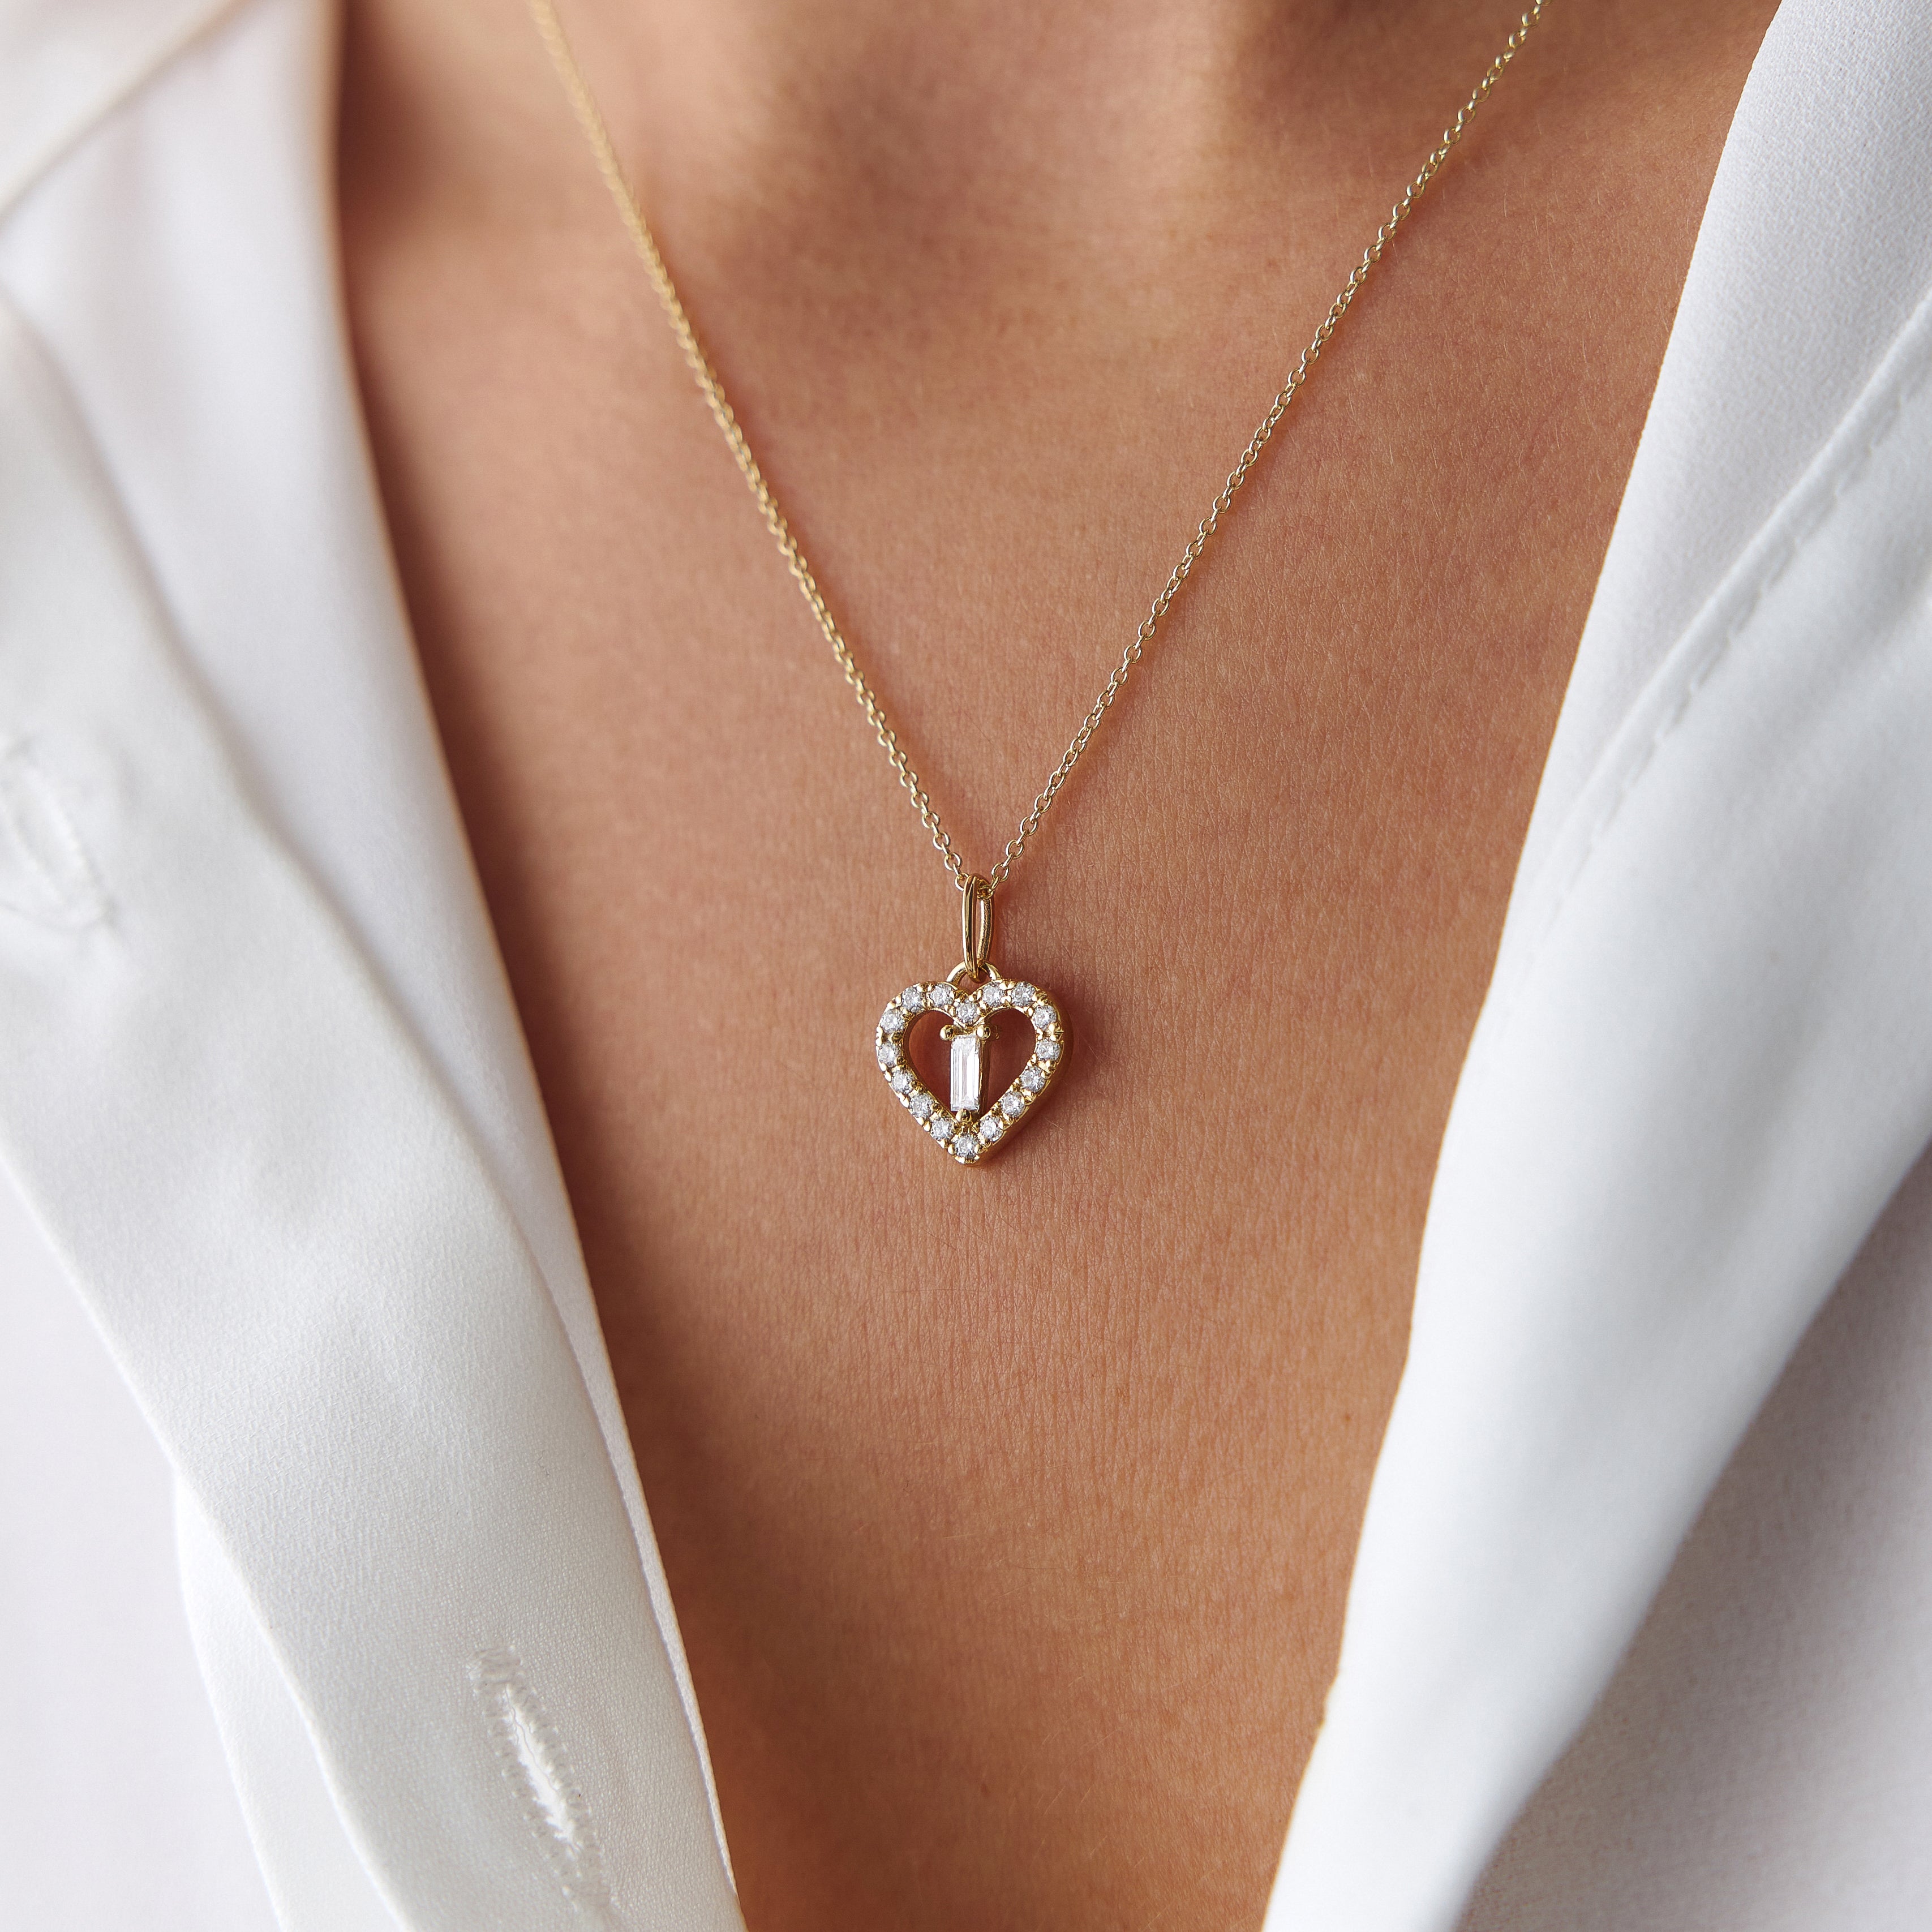 Diamond Heart Pendant Necklace Available in 14K and 18K Gold